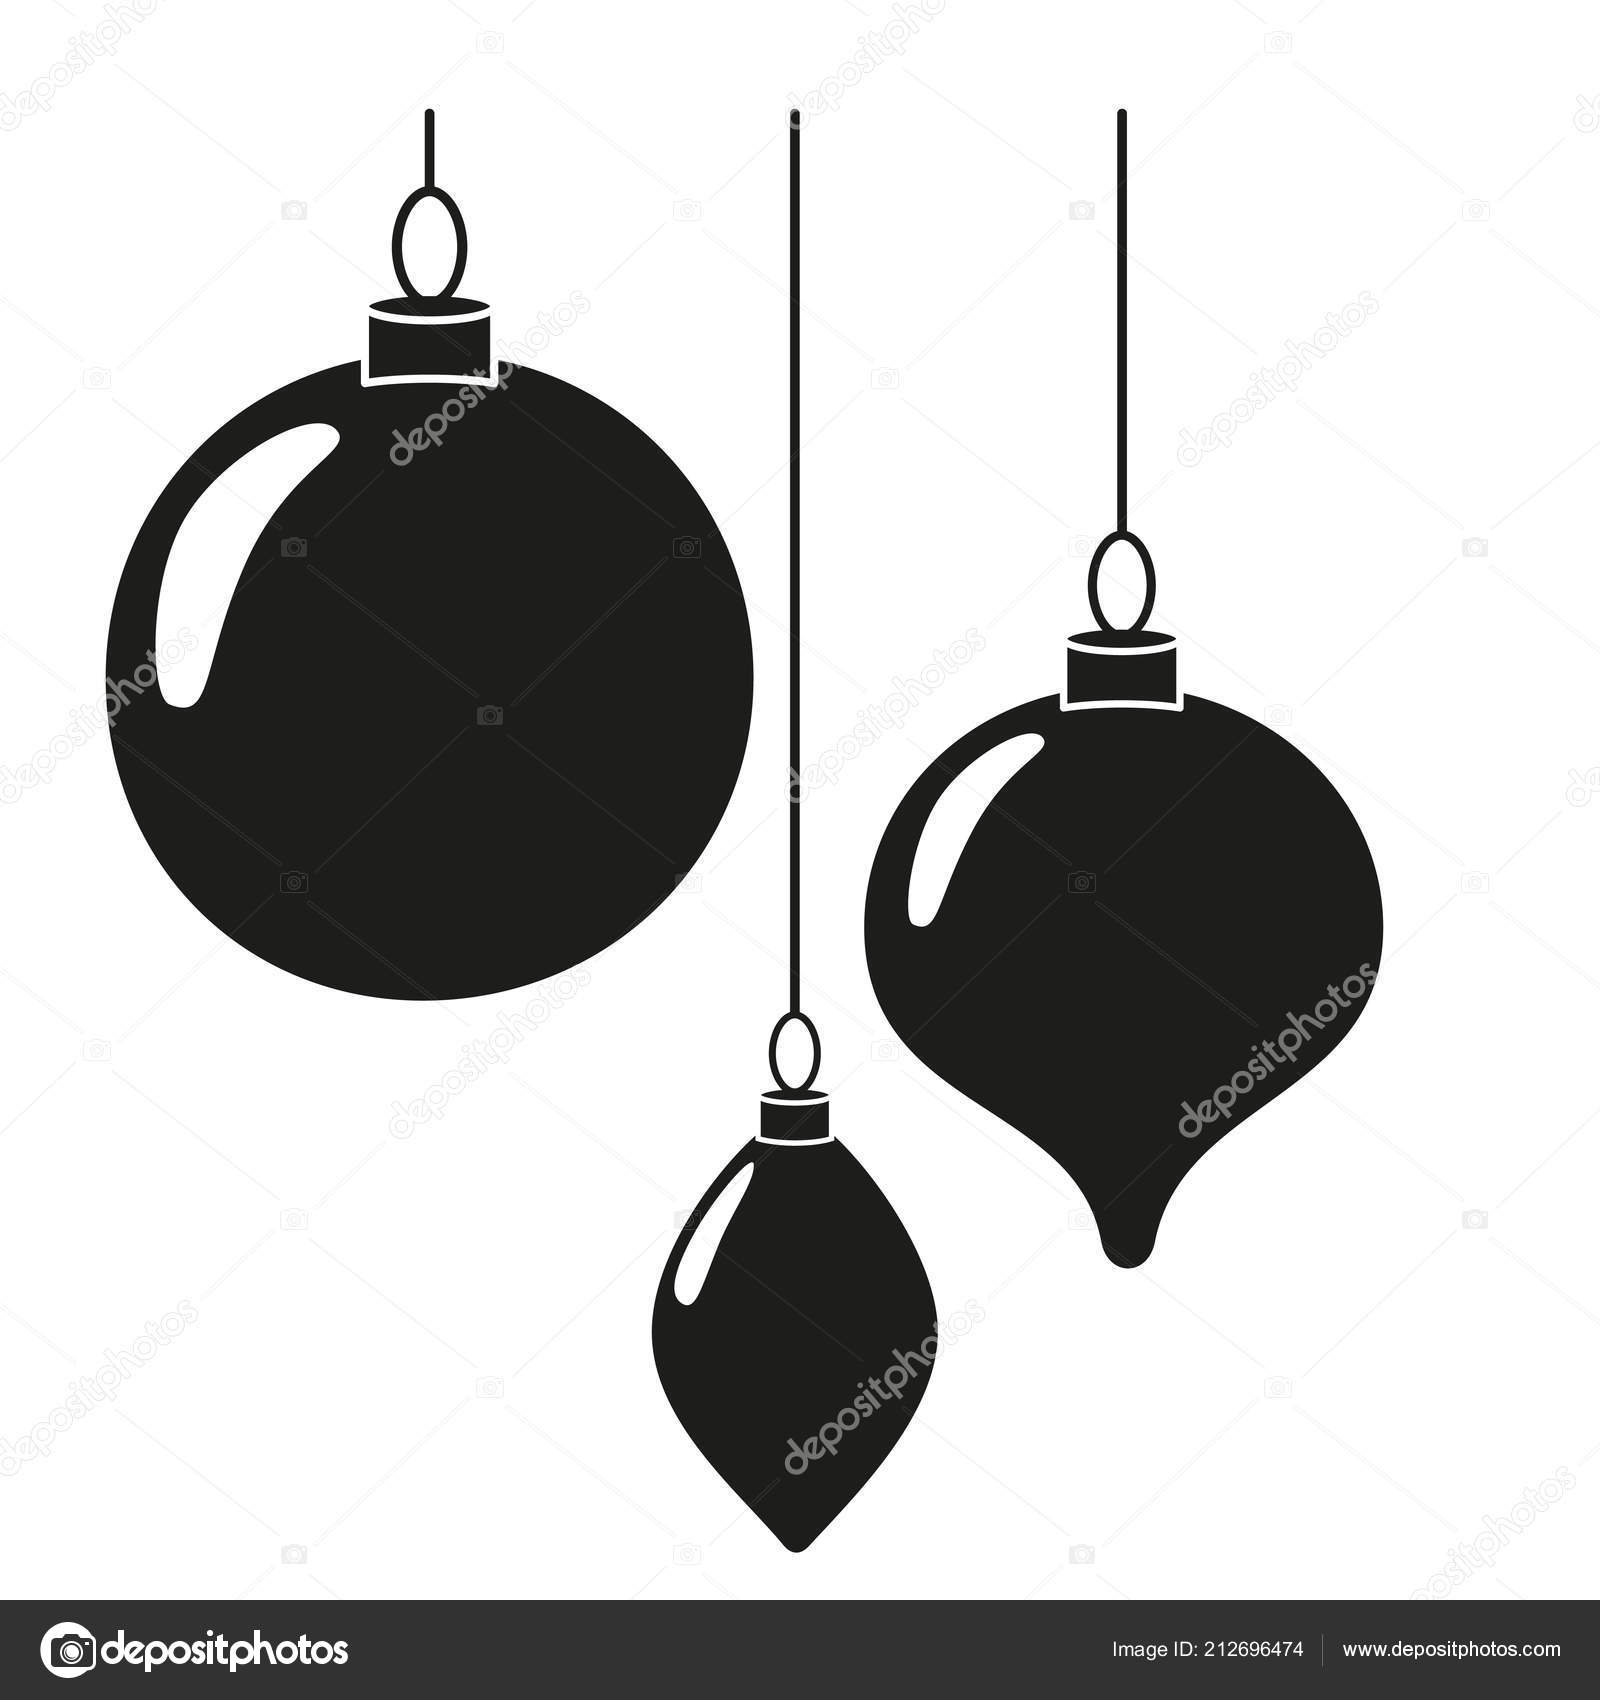 Black and white christmas tree decorations silhouette set Three hanging xmas baubles New year holiday themed vector illustration for icon stamp label